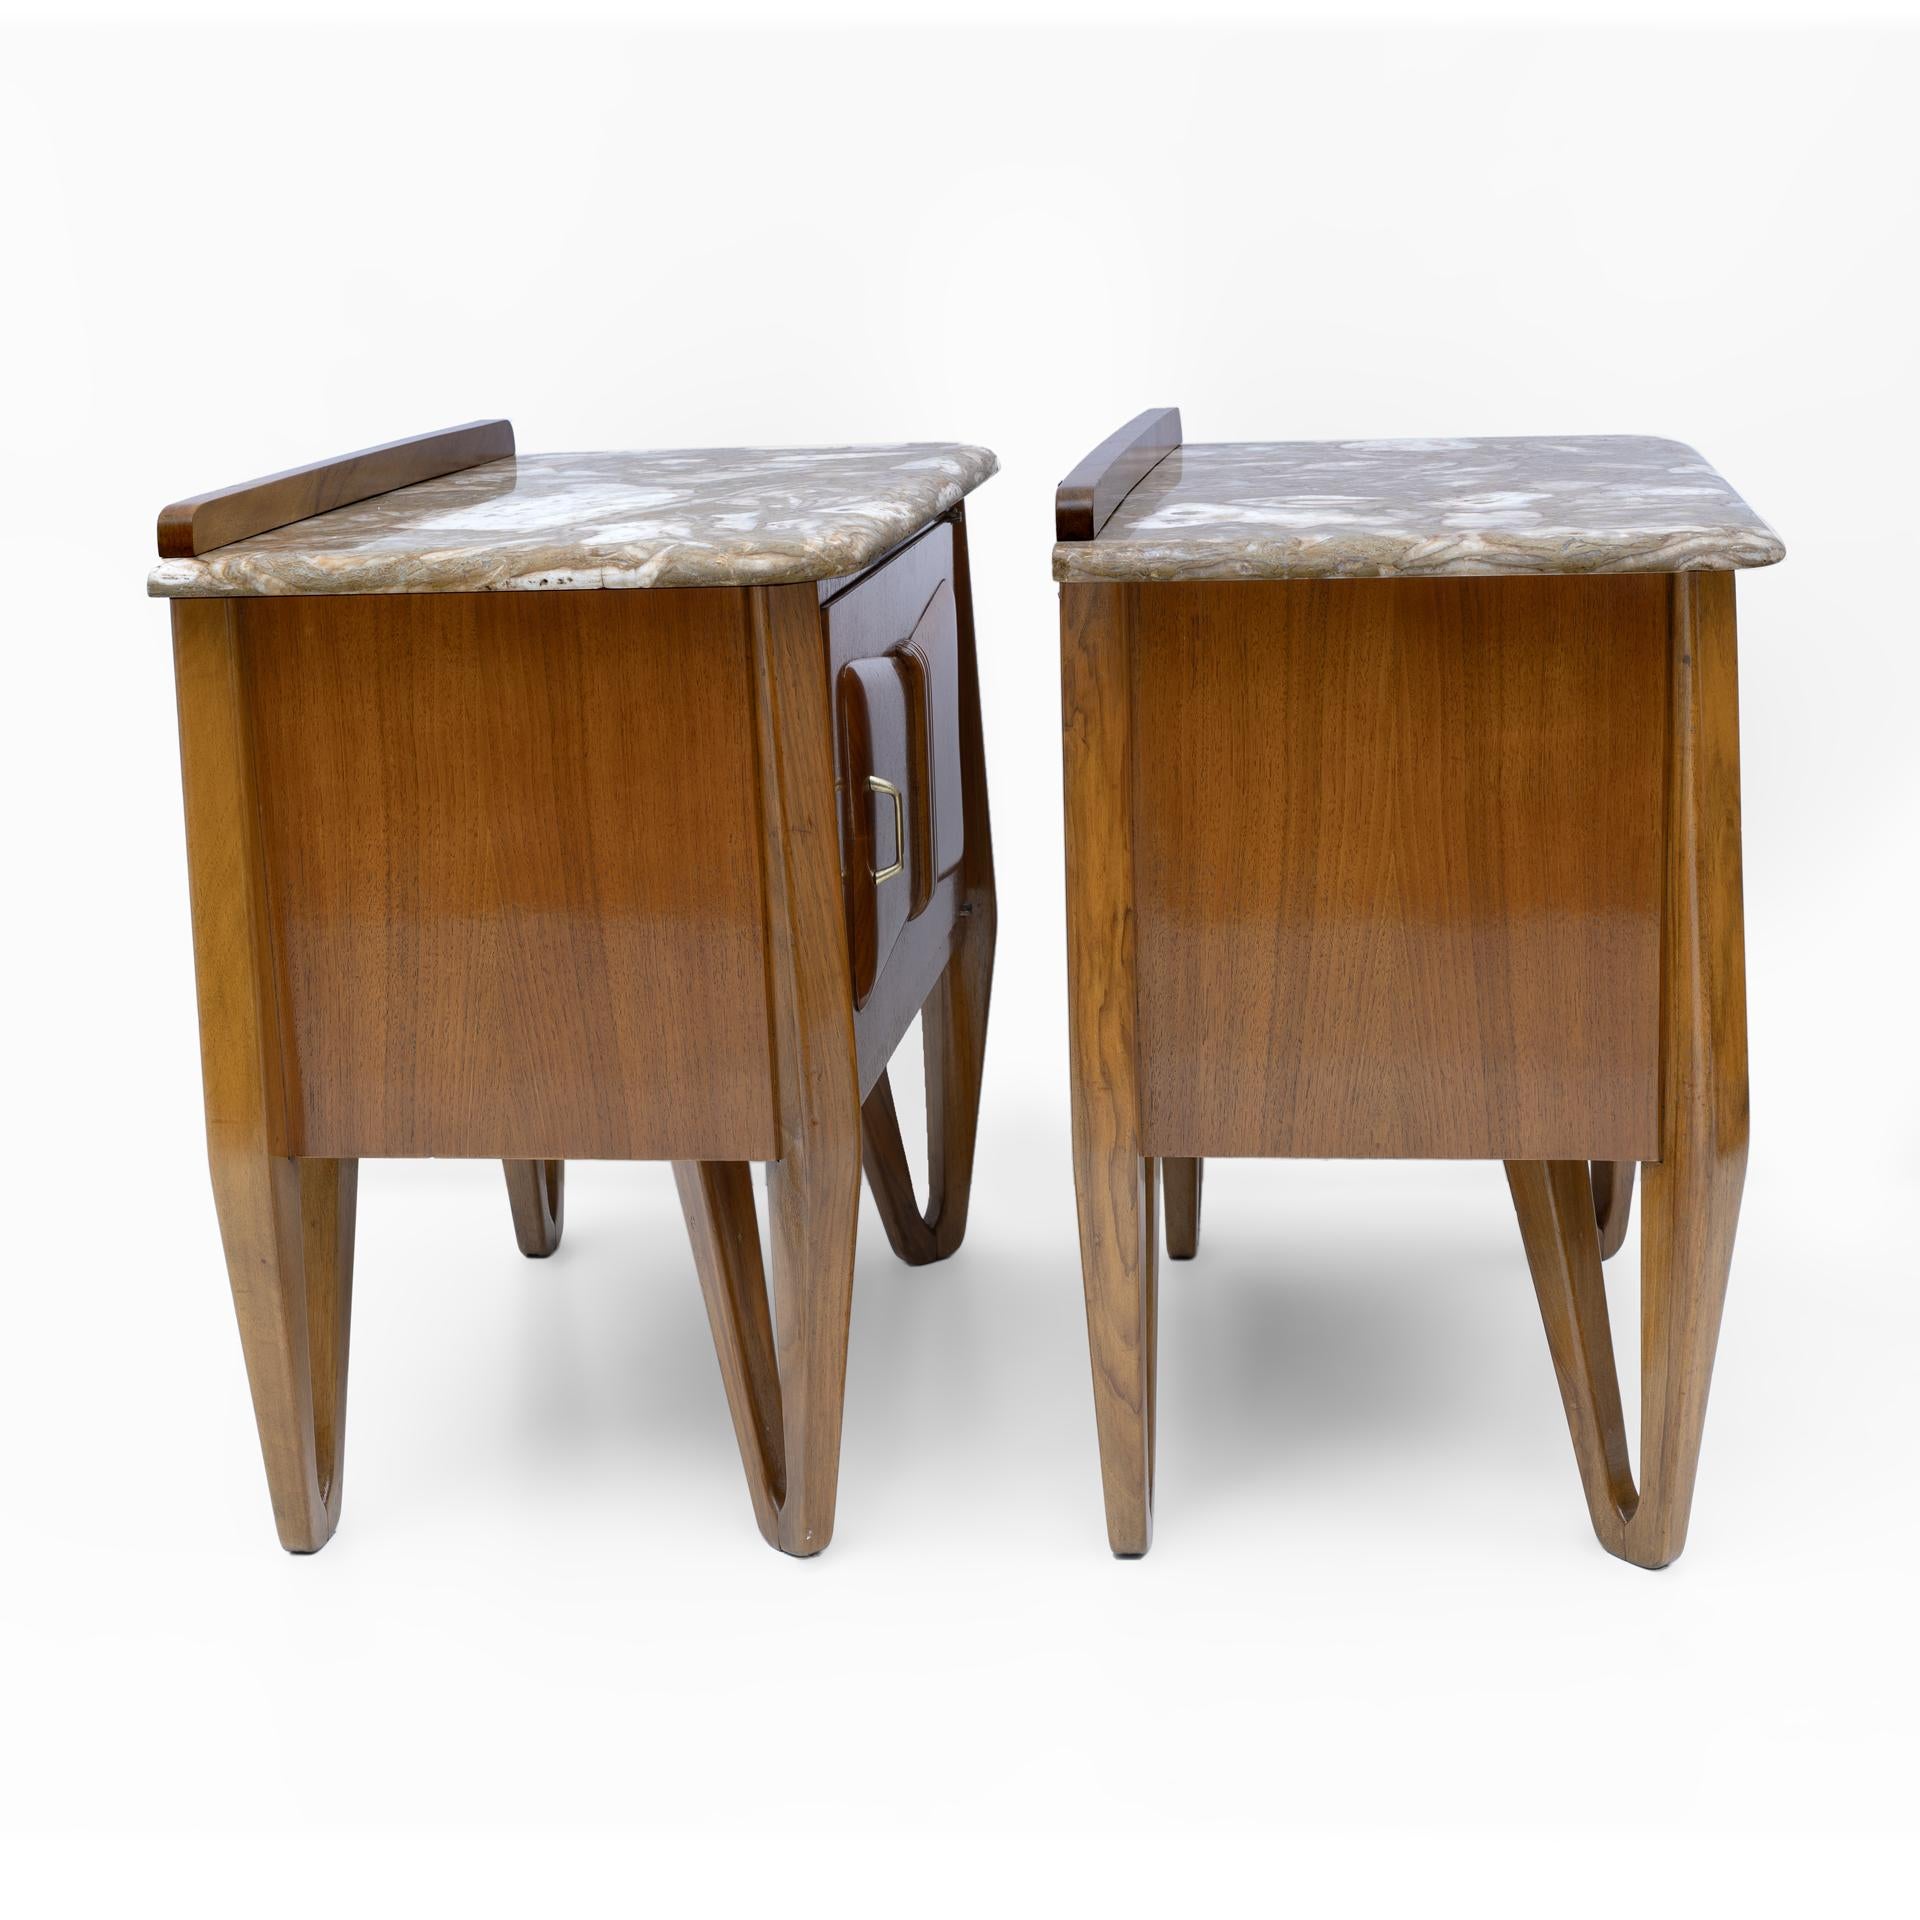 Pair of Mid-Century Modern Italian Walnut and Marble Nightstands, 1950s For Sale 3